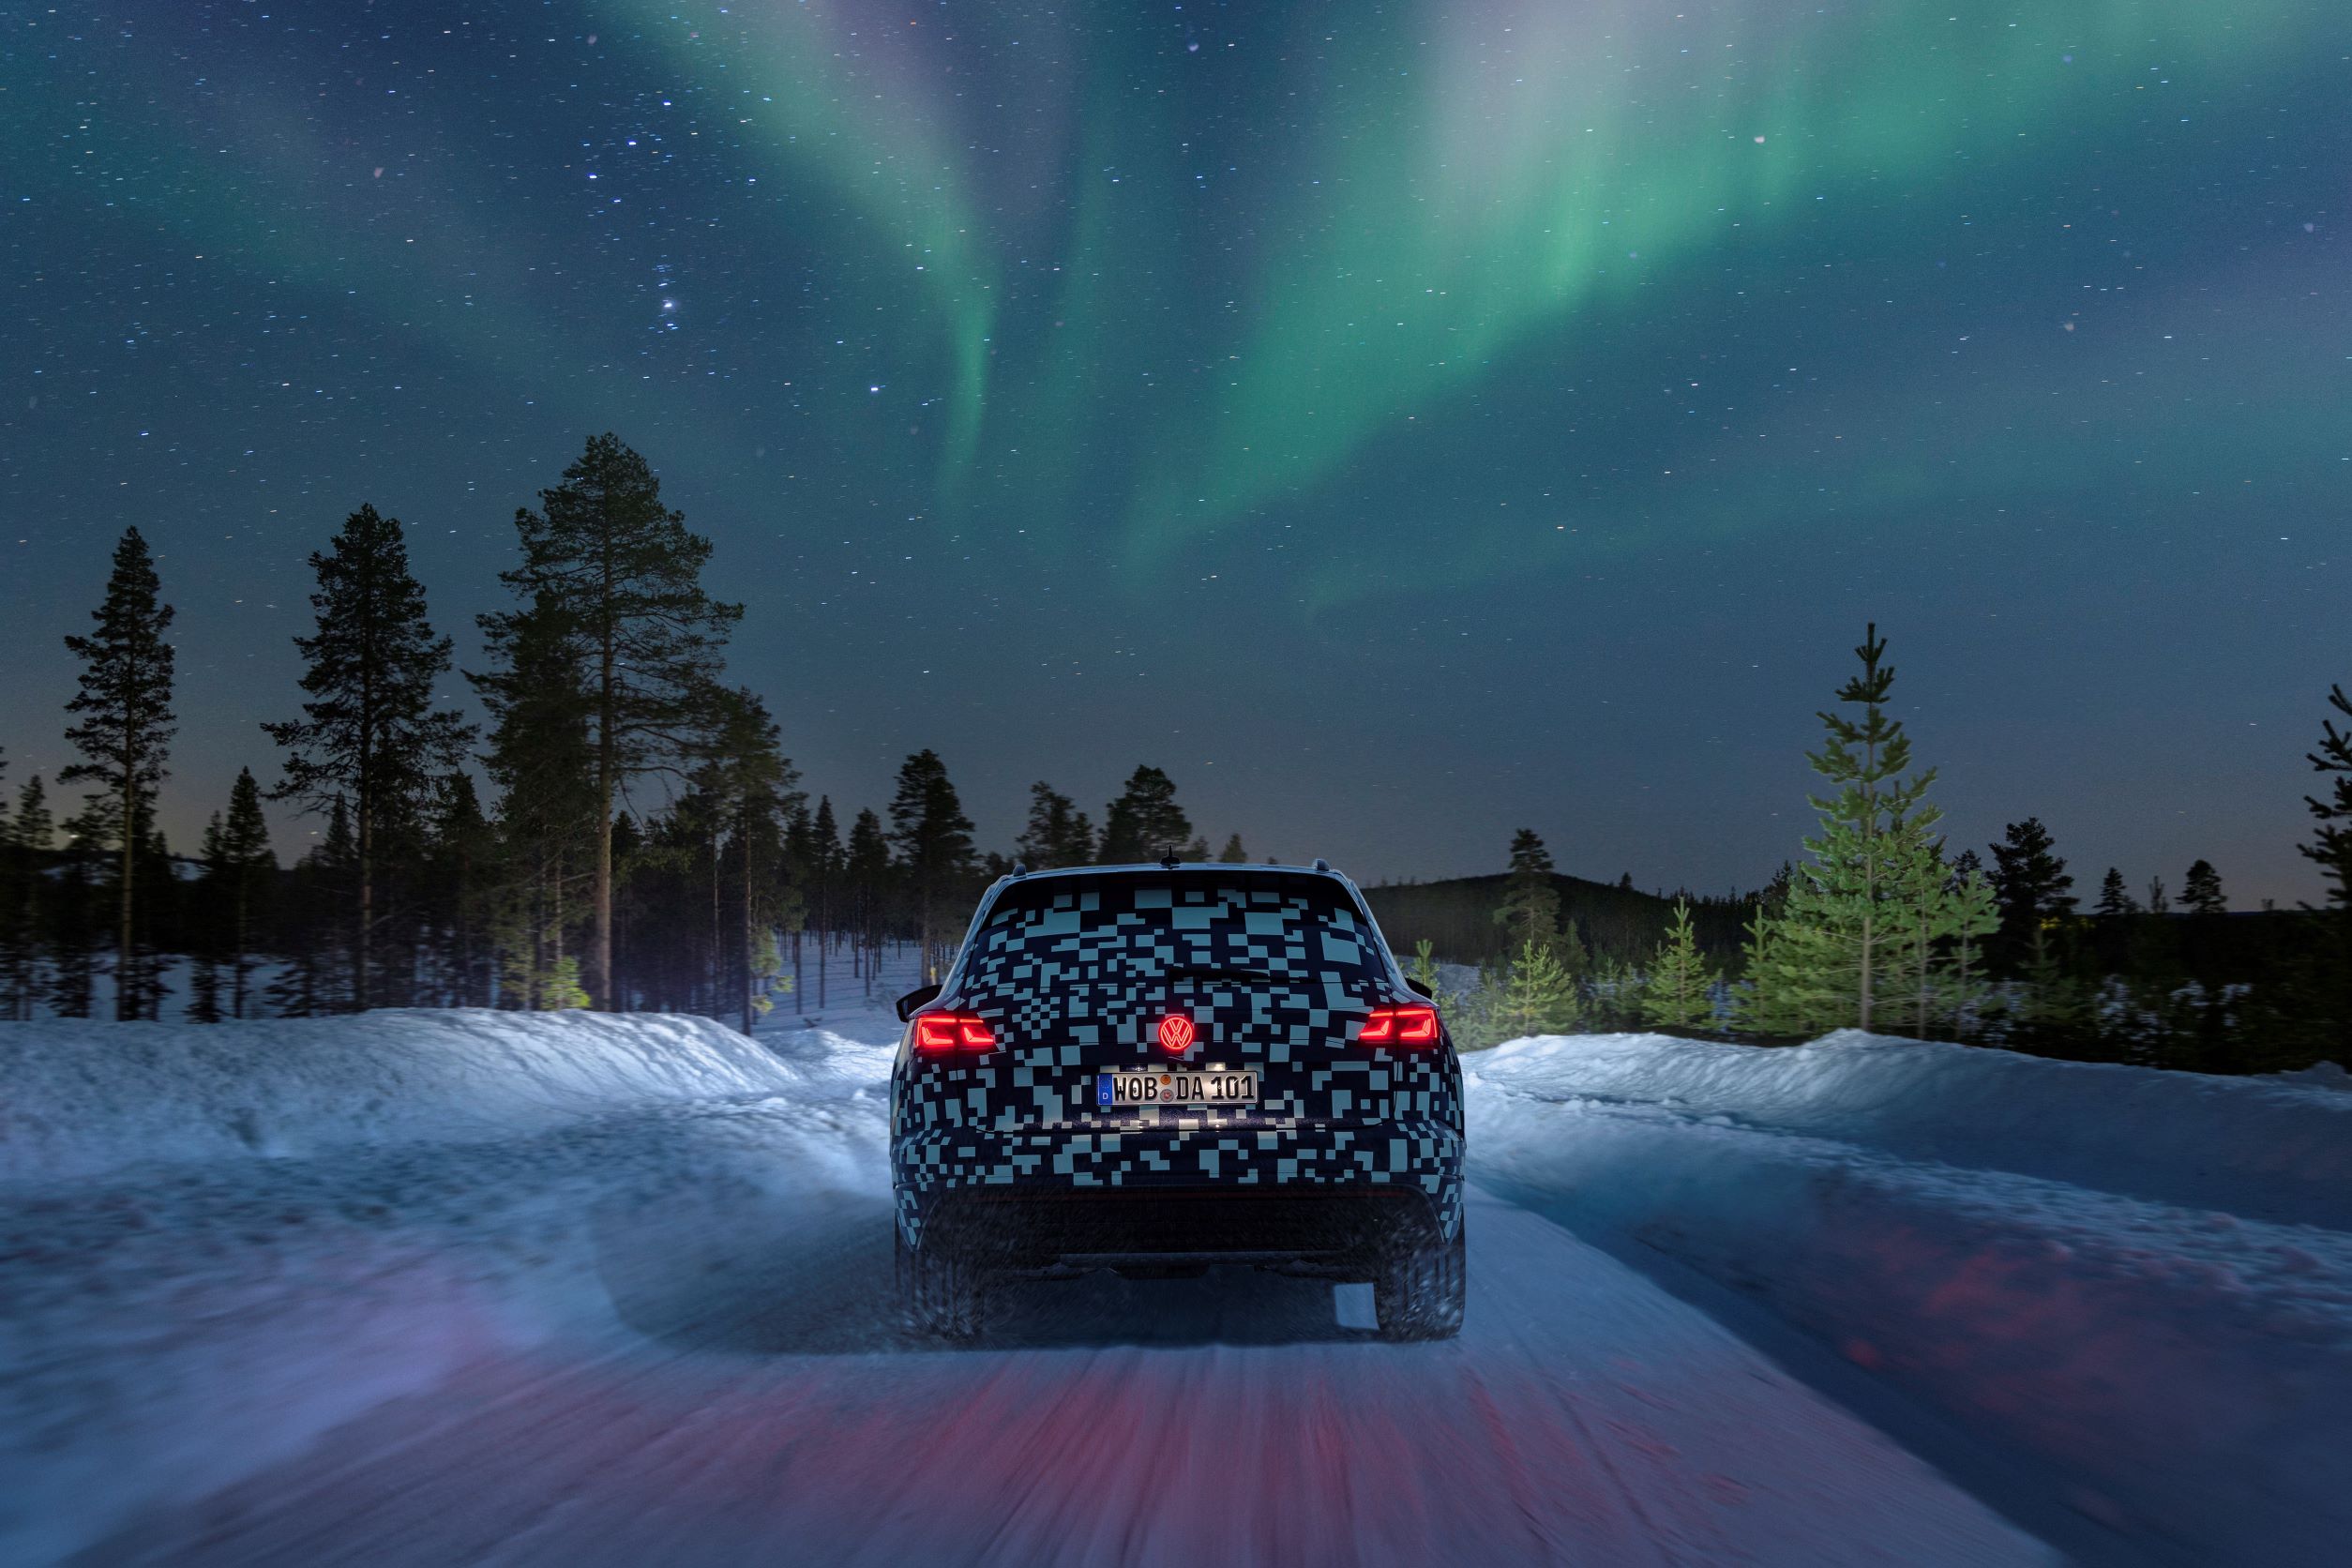 Rear view of the new Volkswagen Touareg being tested under the Northern Lights in Sweden